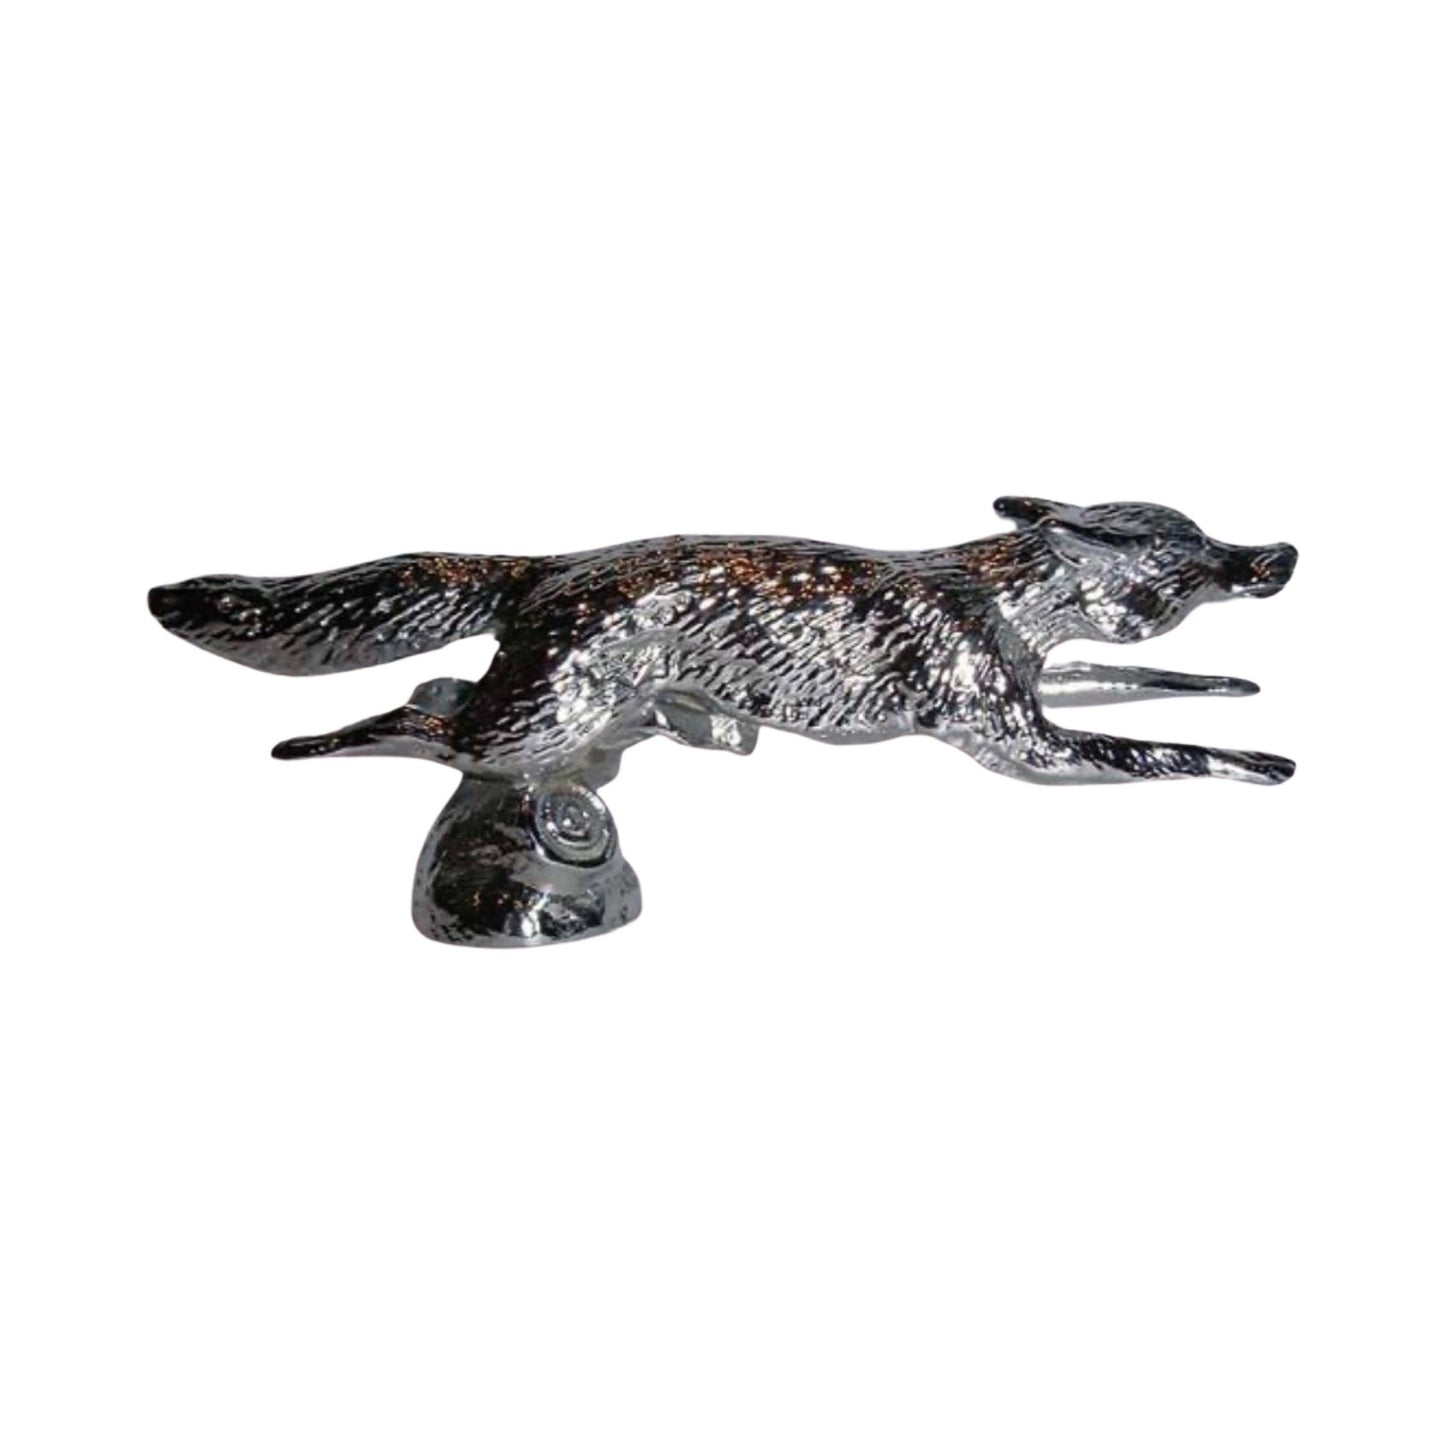 Hood Ornament | Running Fox | Small |  Mascot / Hood Ornament | Chrome Plate Finish | 2 by 5 Inches | Made in England